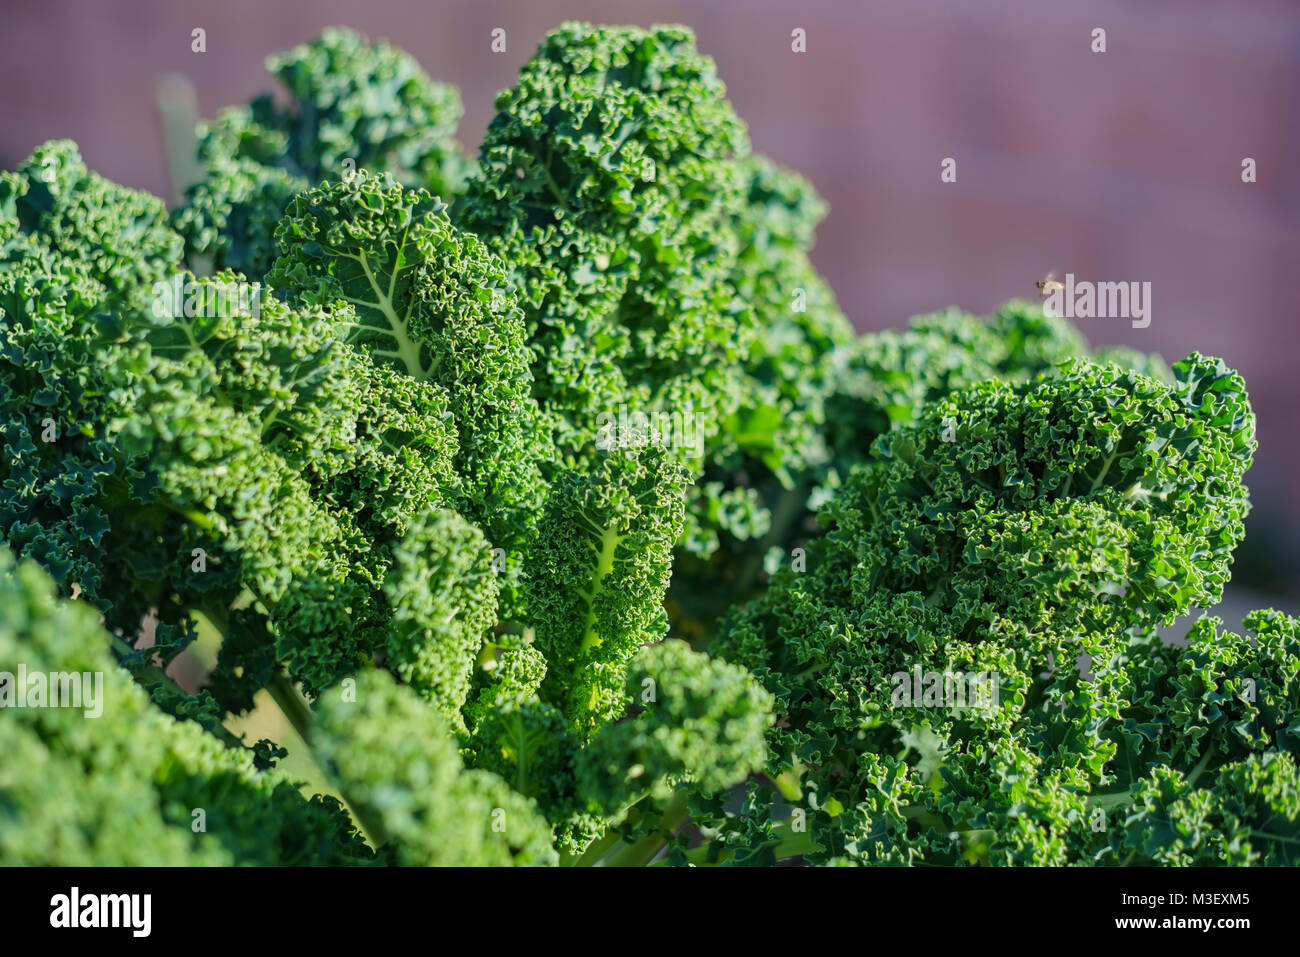 Growing kale in farm garden at Los Angeles Stock Photo